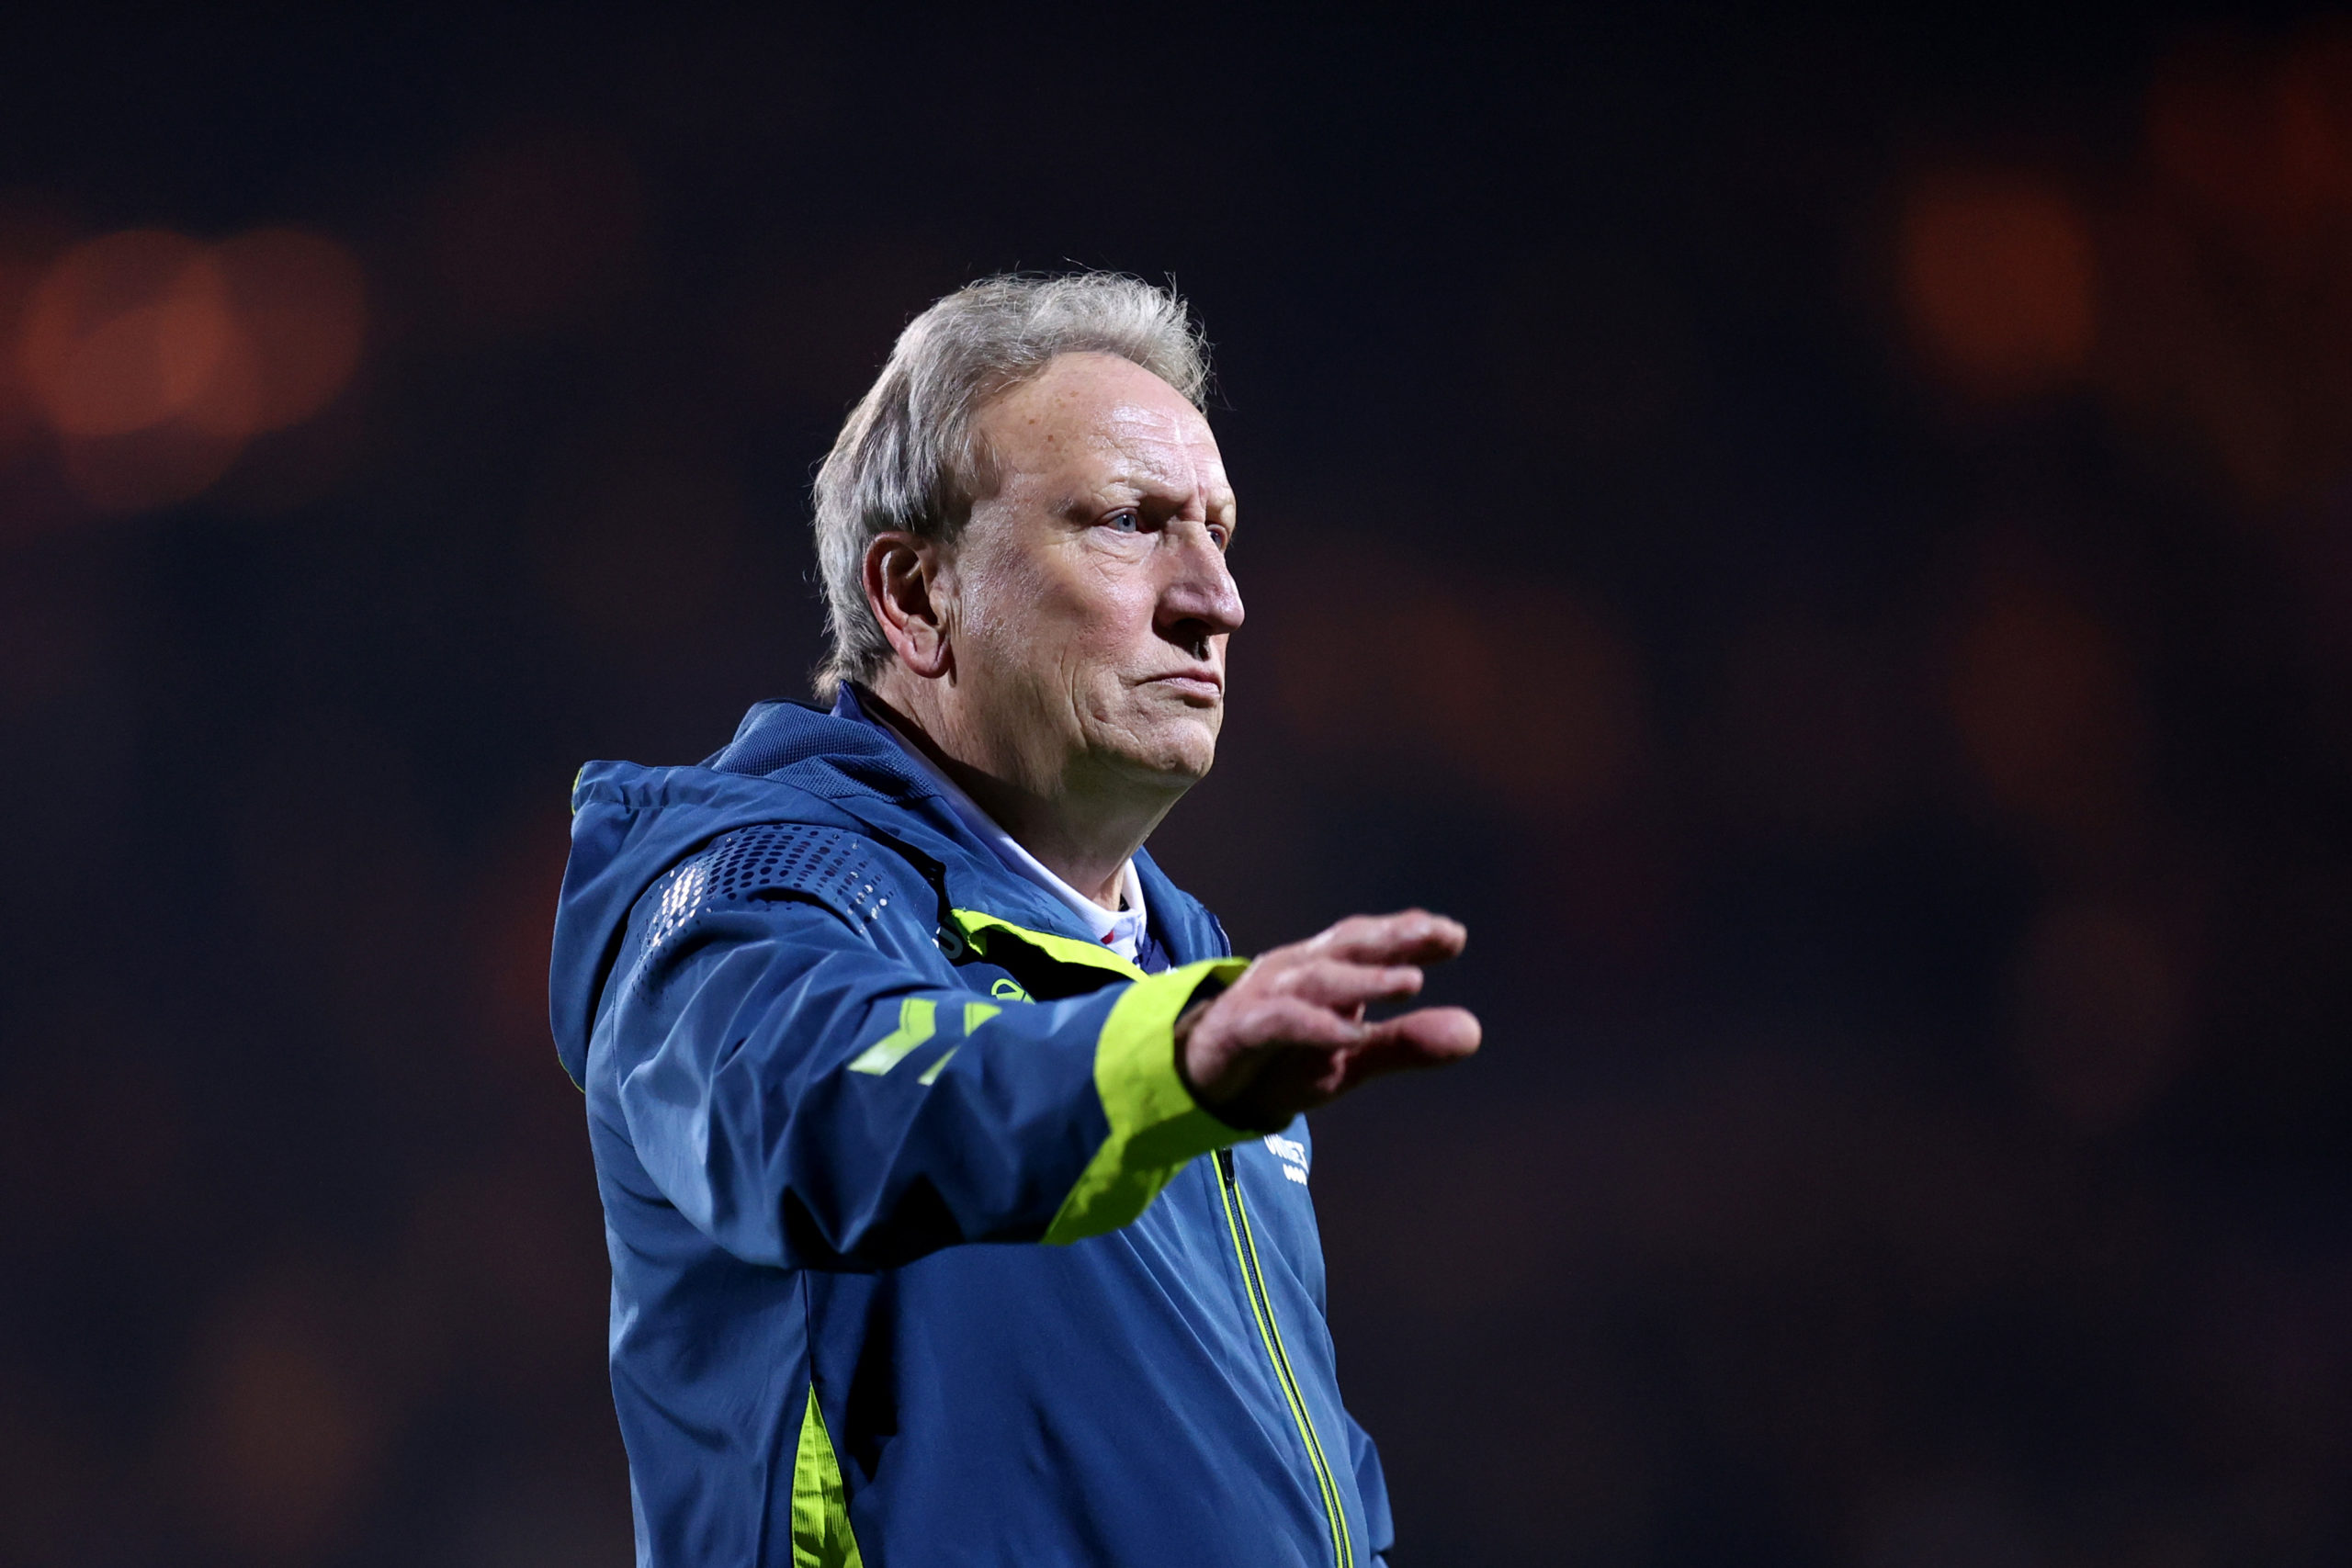 Neil Warnock claims Chelsea’s £150k-a-week player isn’t a very good defender and is lucky he’s at the club